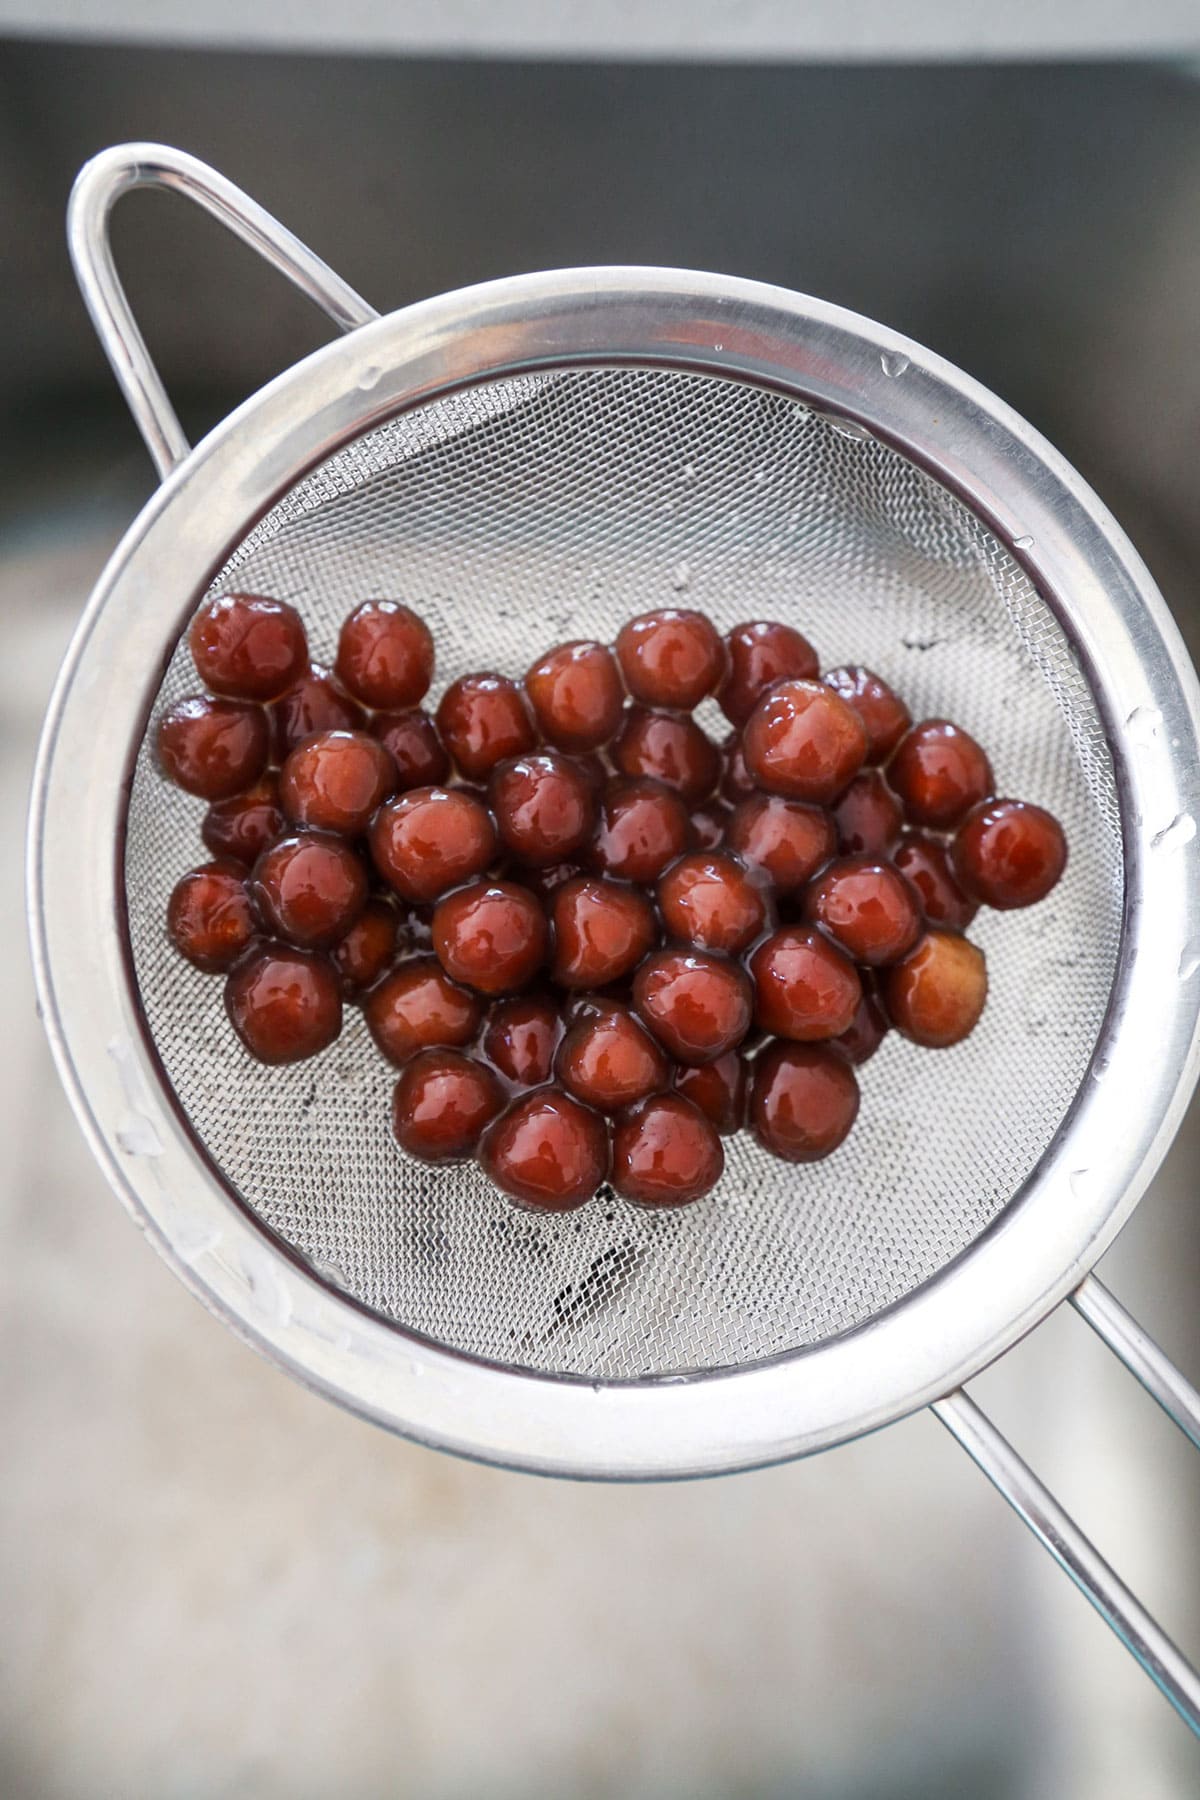 Cooked Tapioca Pearls